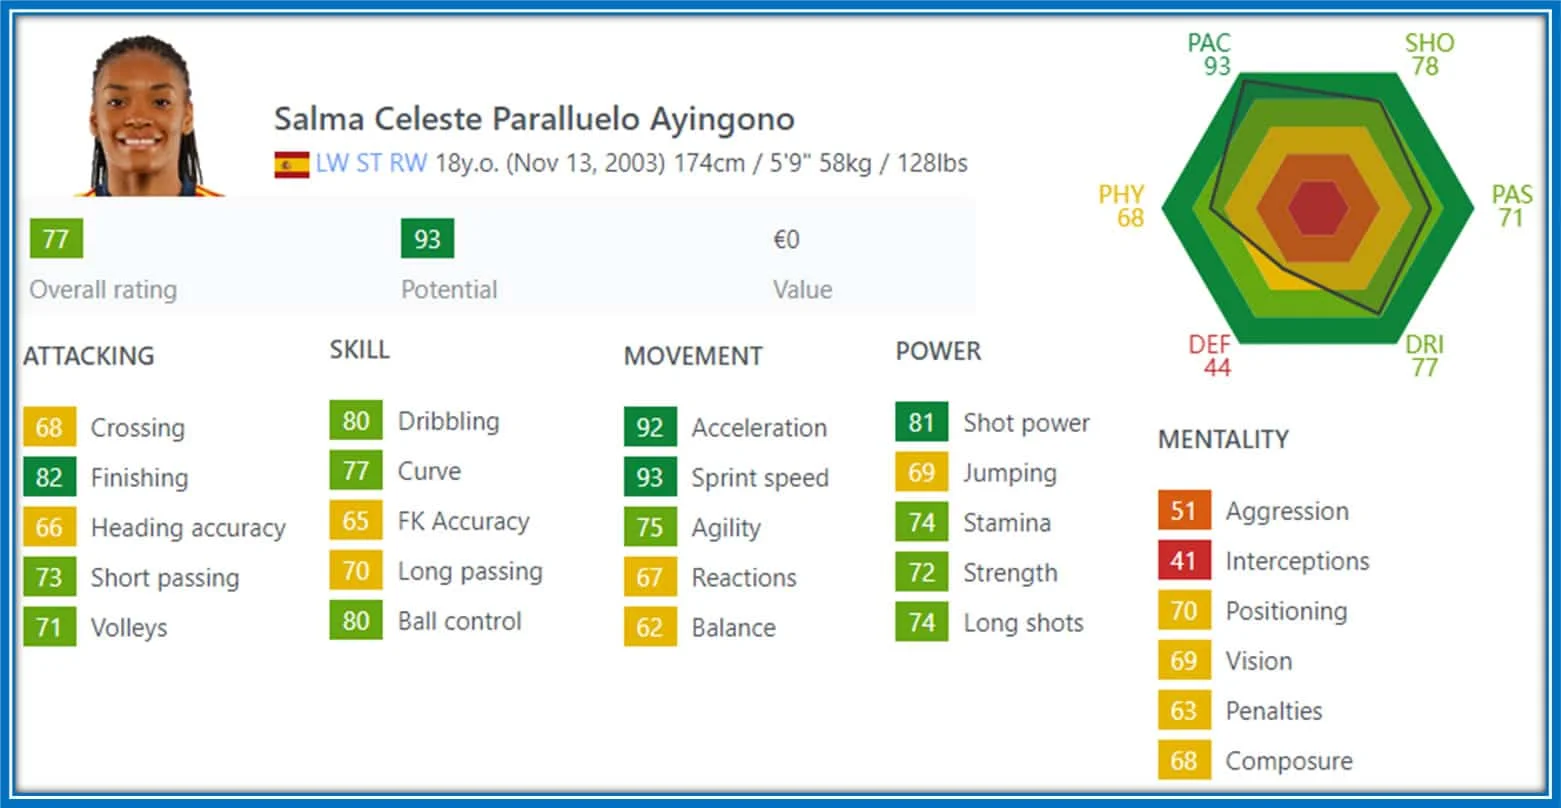 Salma Paralluelo’s FIFA rating shows her best stats as a striker. She excelled more in  Acceleration and Sprint Speed. Credit: Sofifa